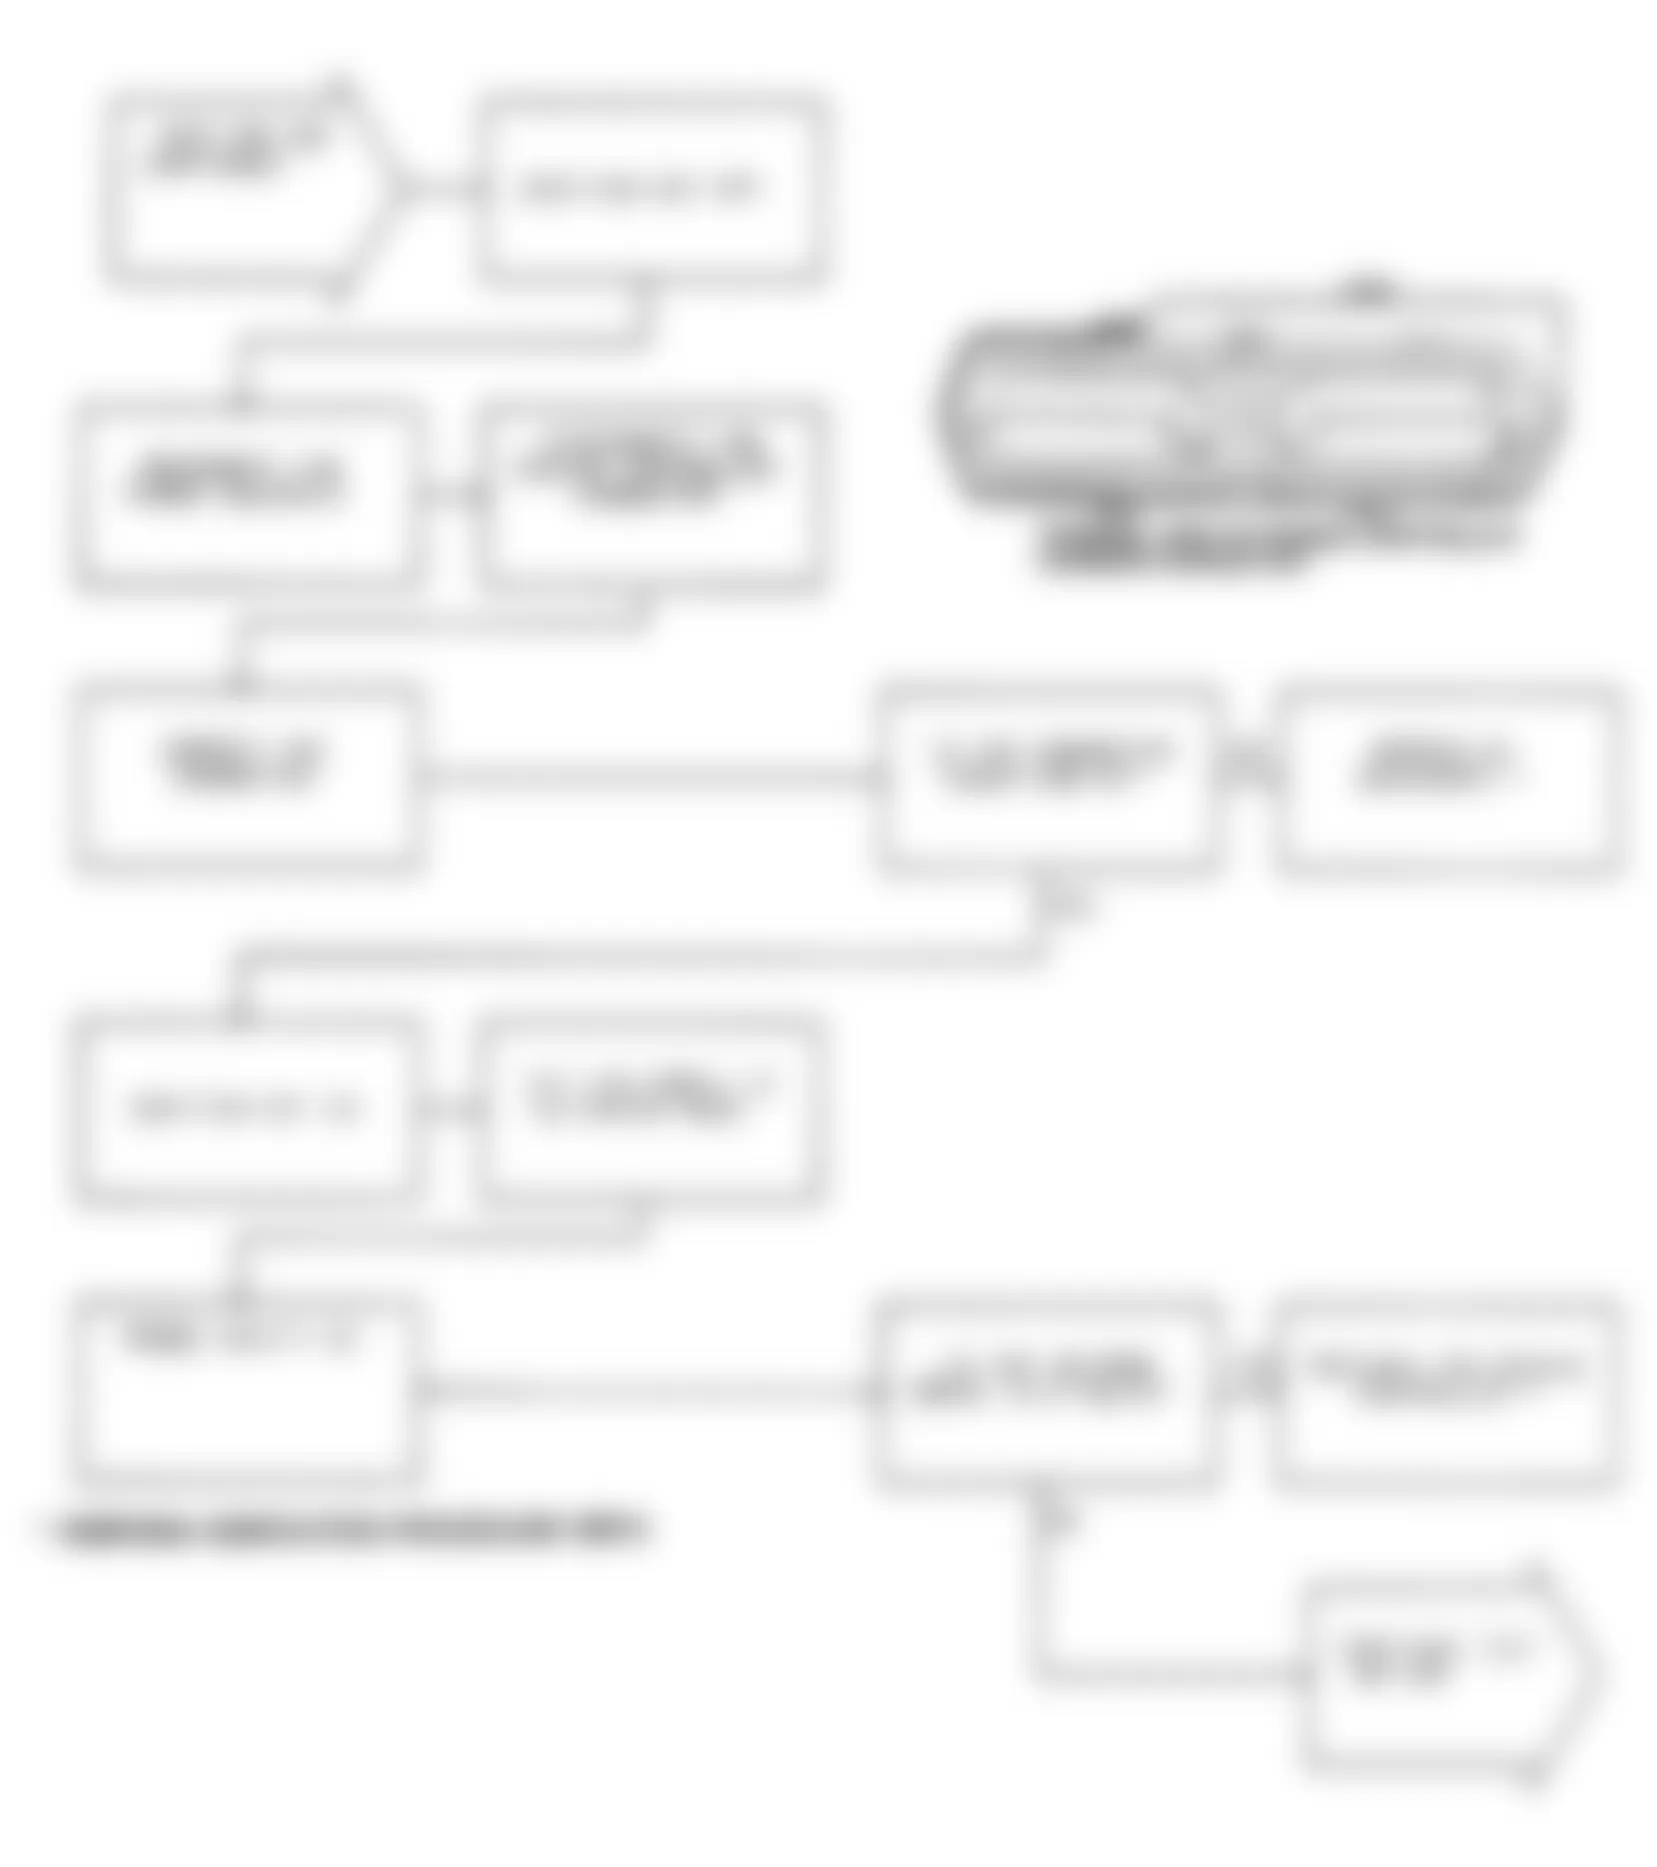 Chrysler LeBaron LX 1991 - Component Locations -  Test DR-18A Code 31, Diagnostic Flow Chart (2 of 3)